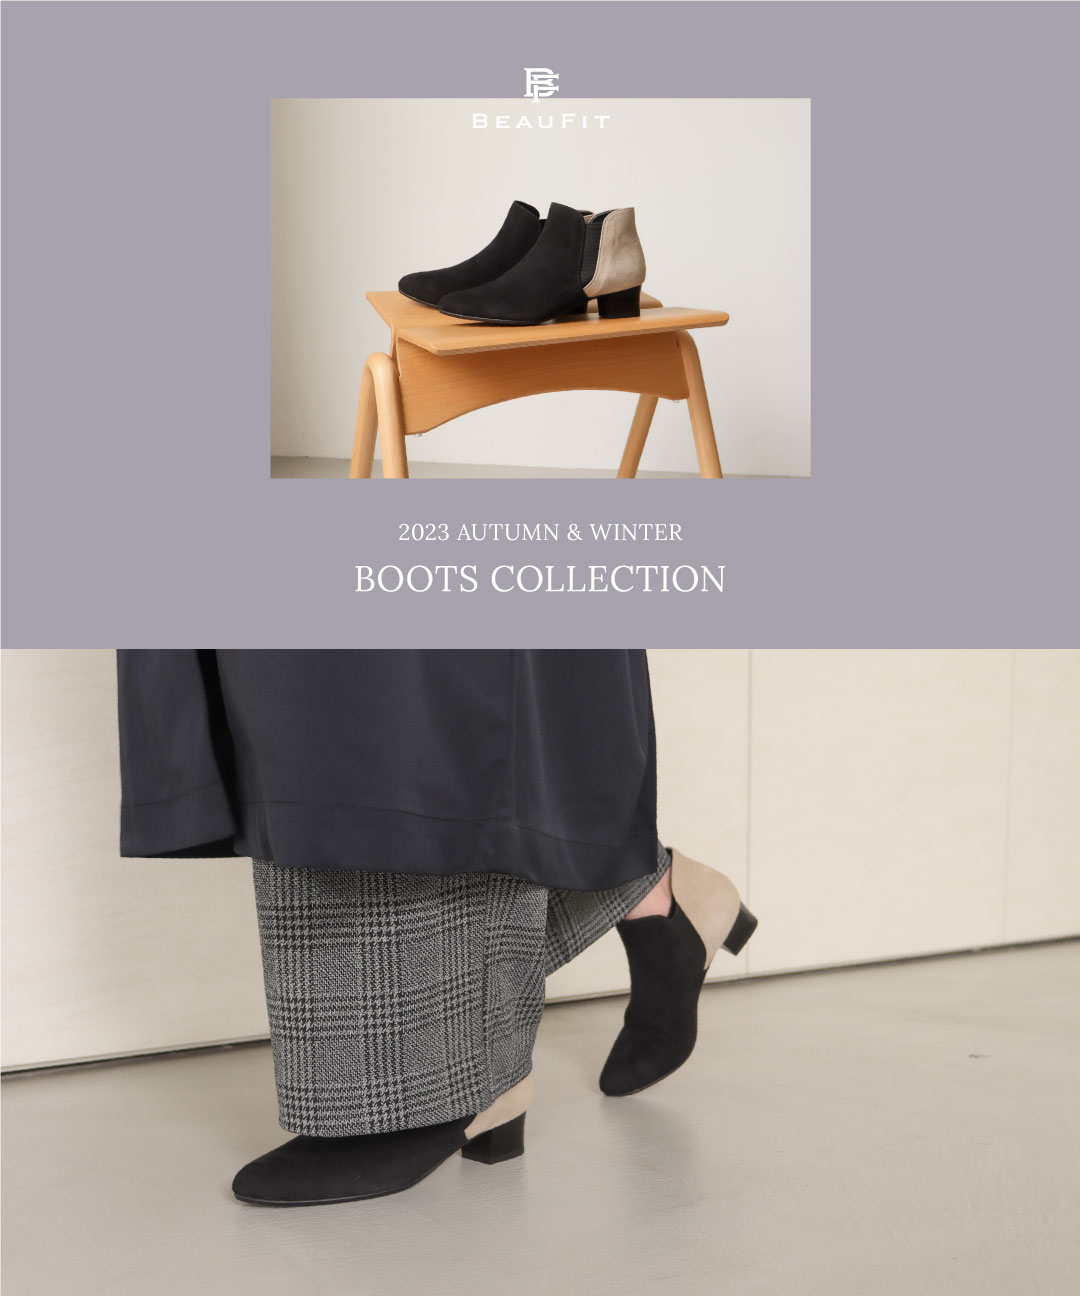 BEAUFIT｜2023 AUTUMN & WINTER BOOTS COLLECTION | 株式会社リーガル